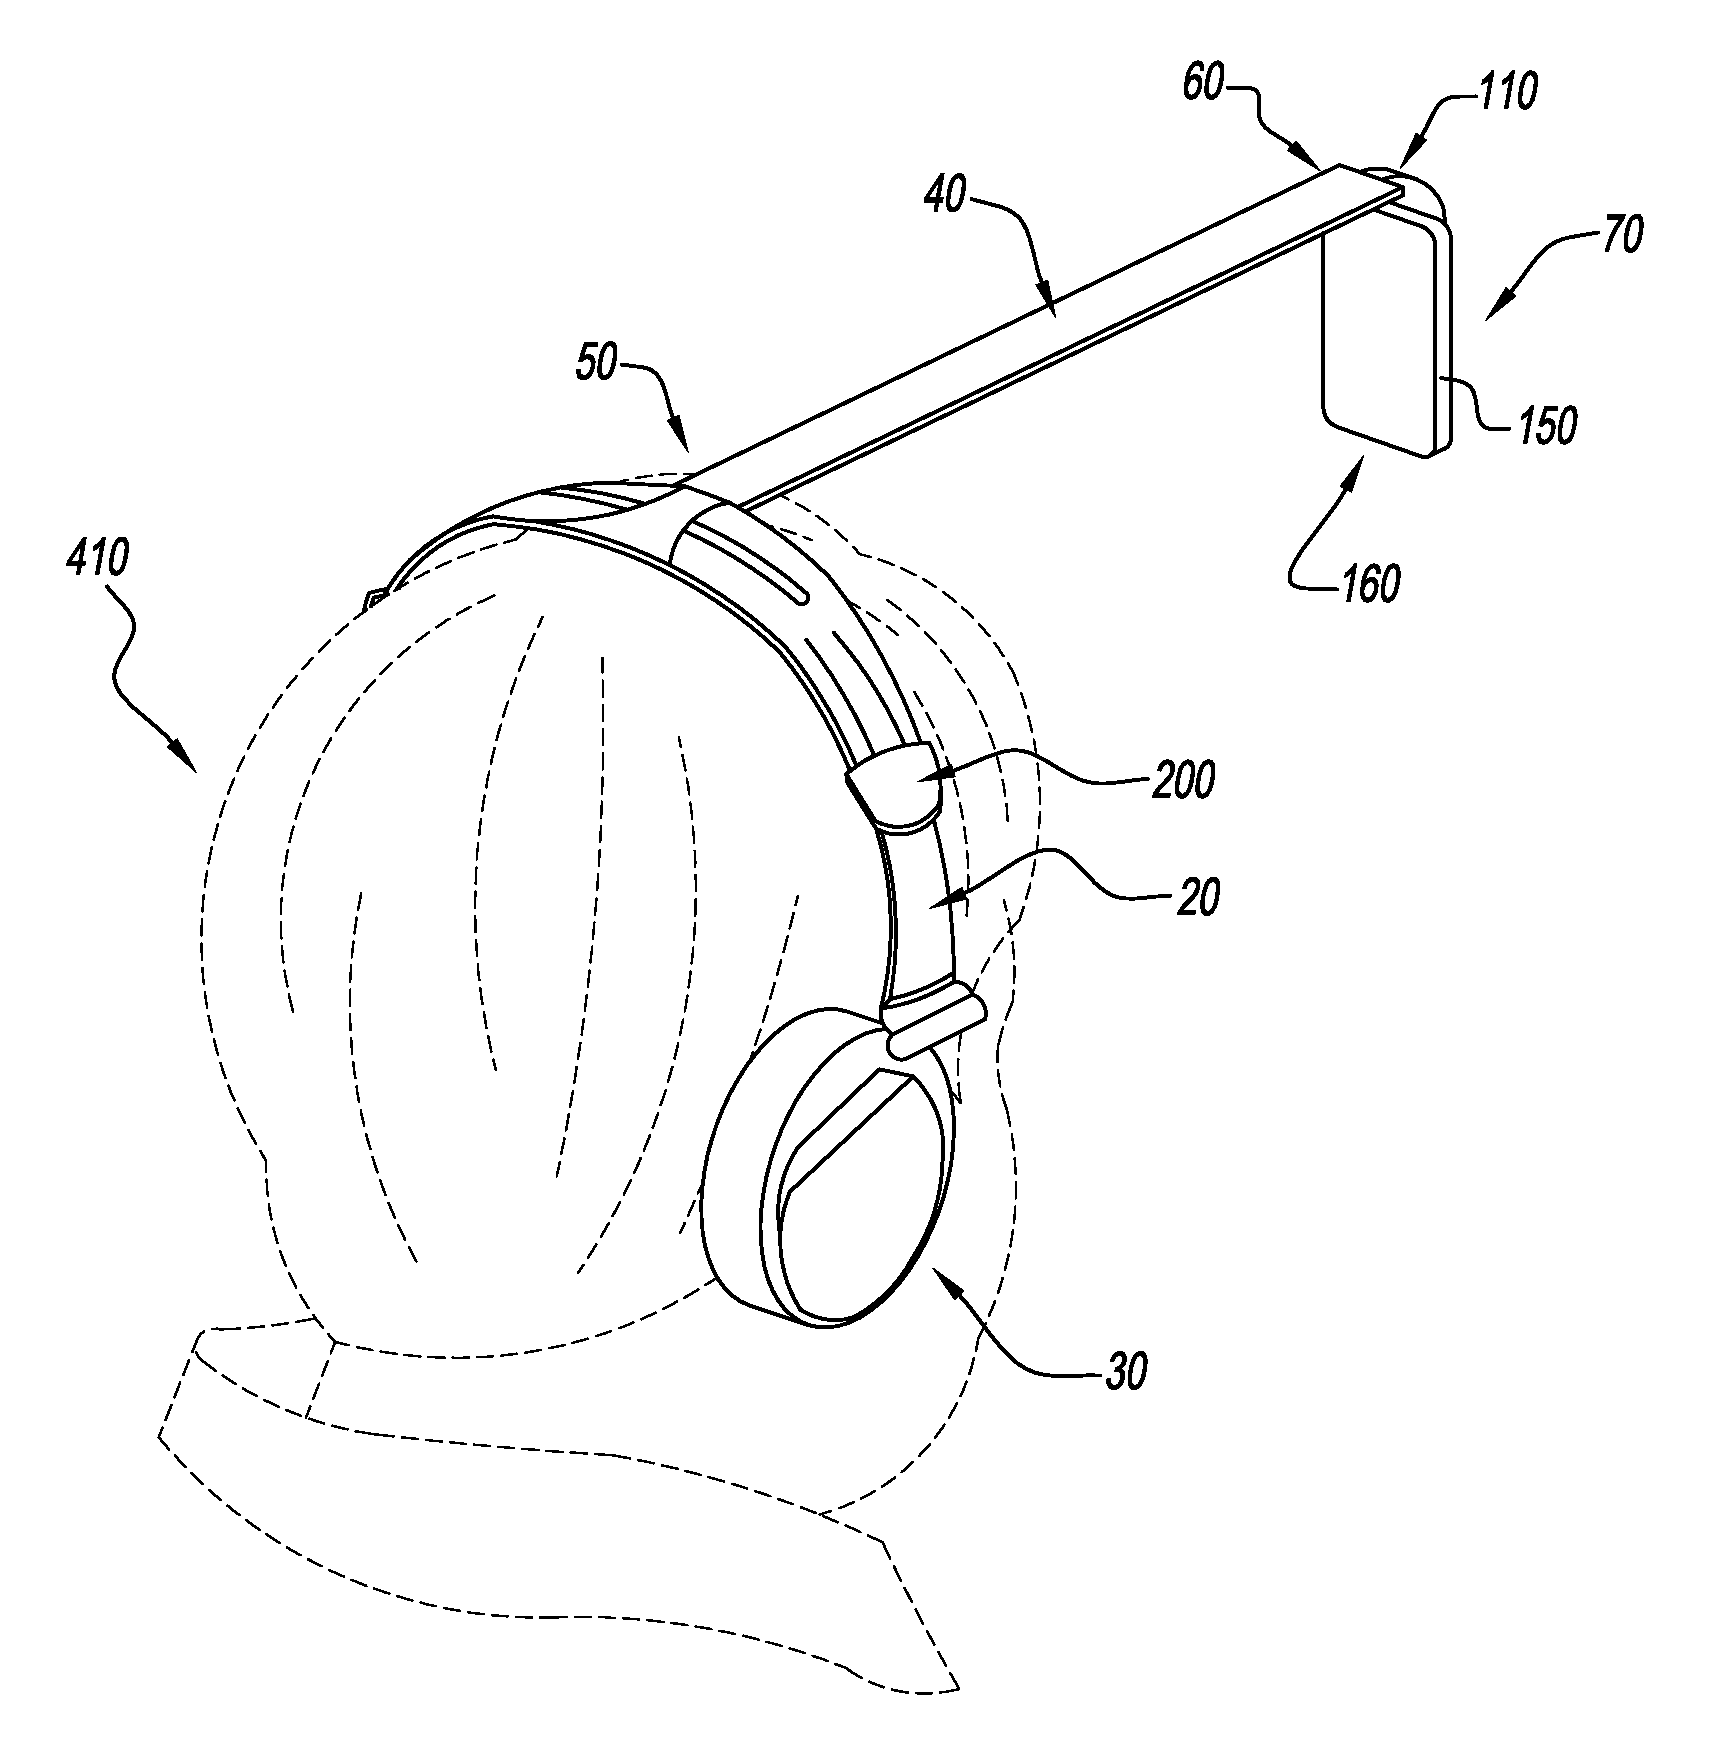 Hands-Free Carrier For Portable Electronic Media Devices